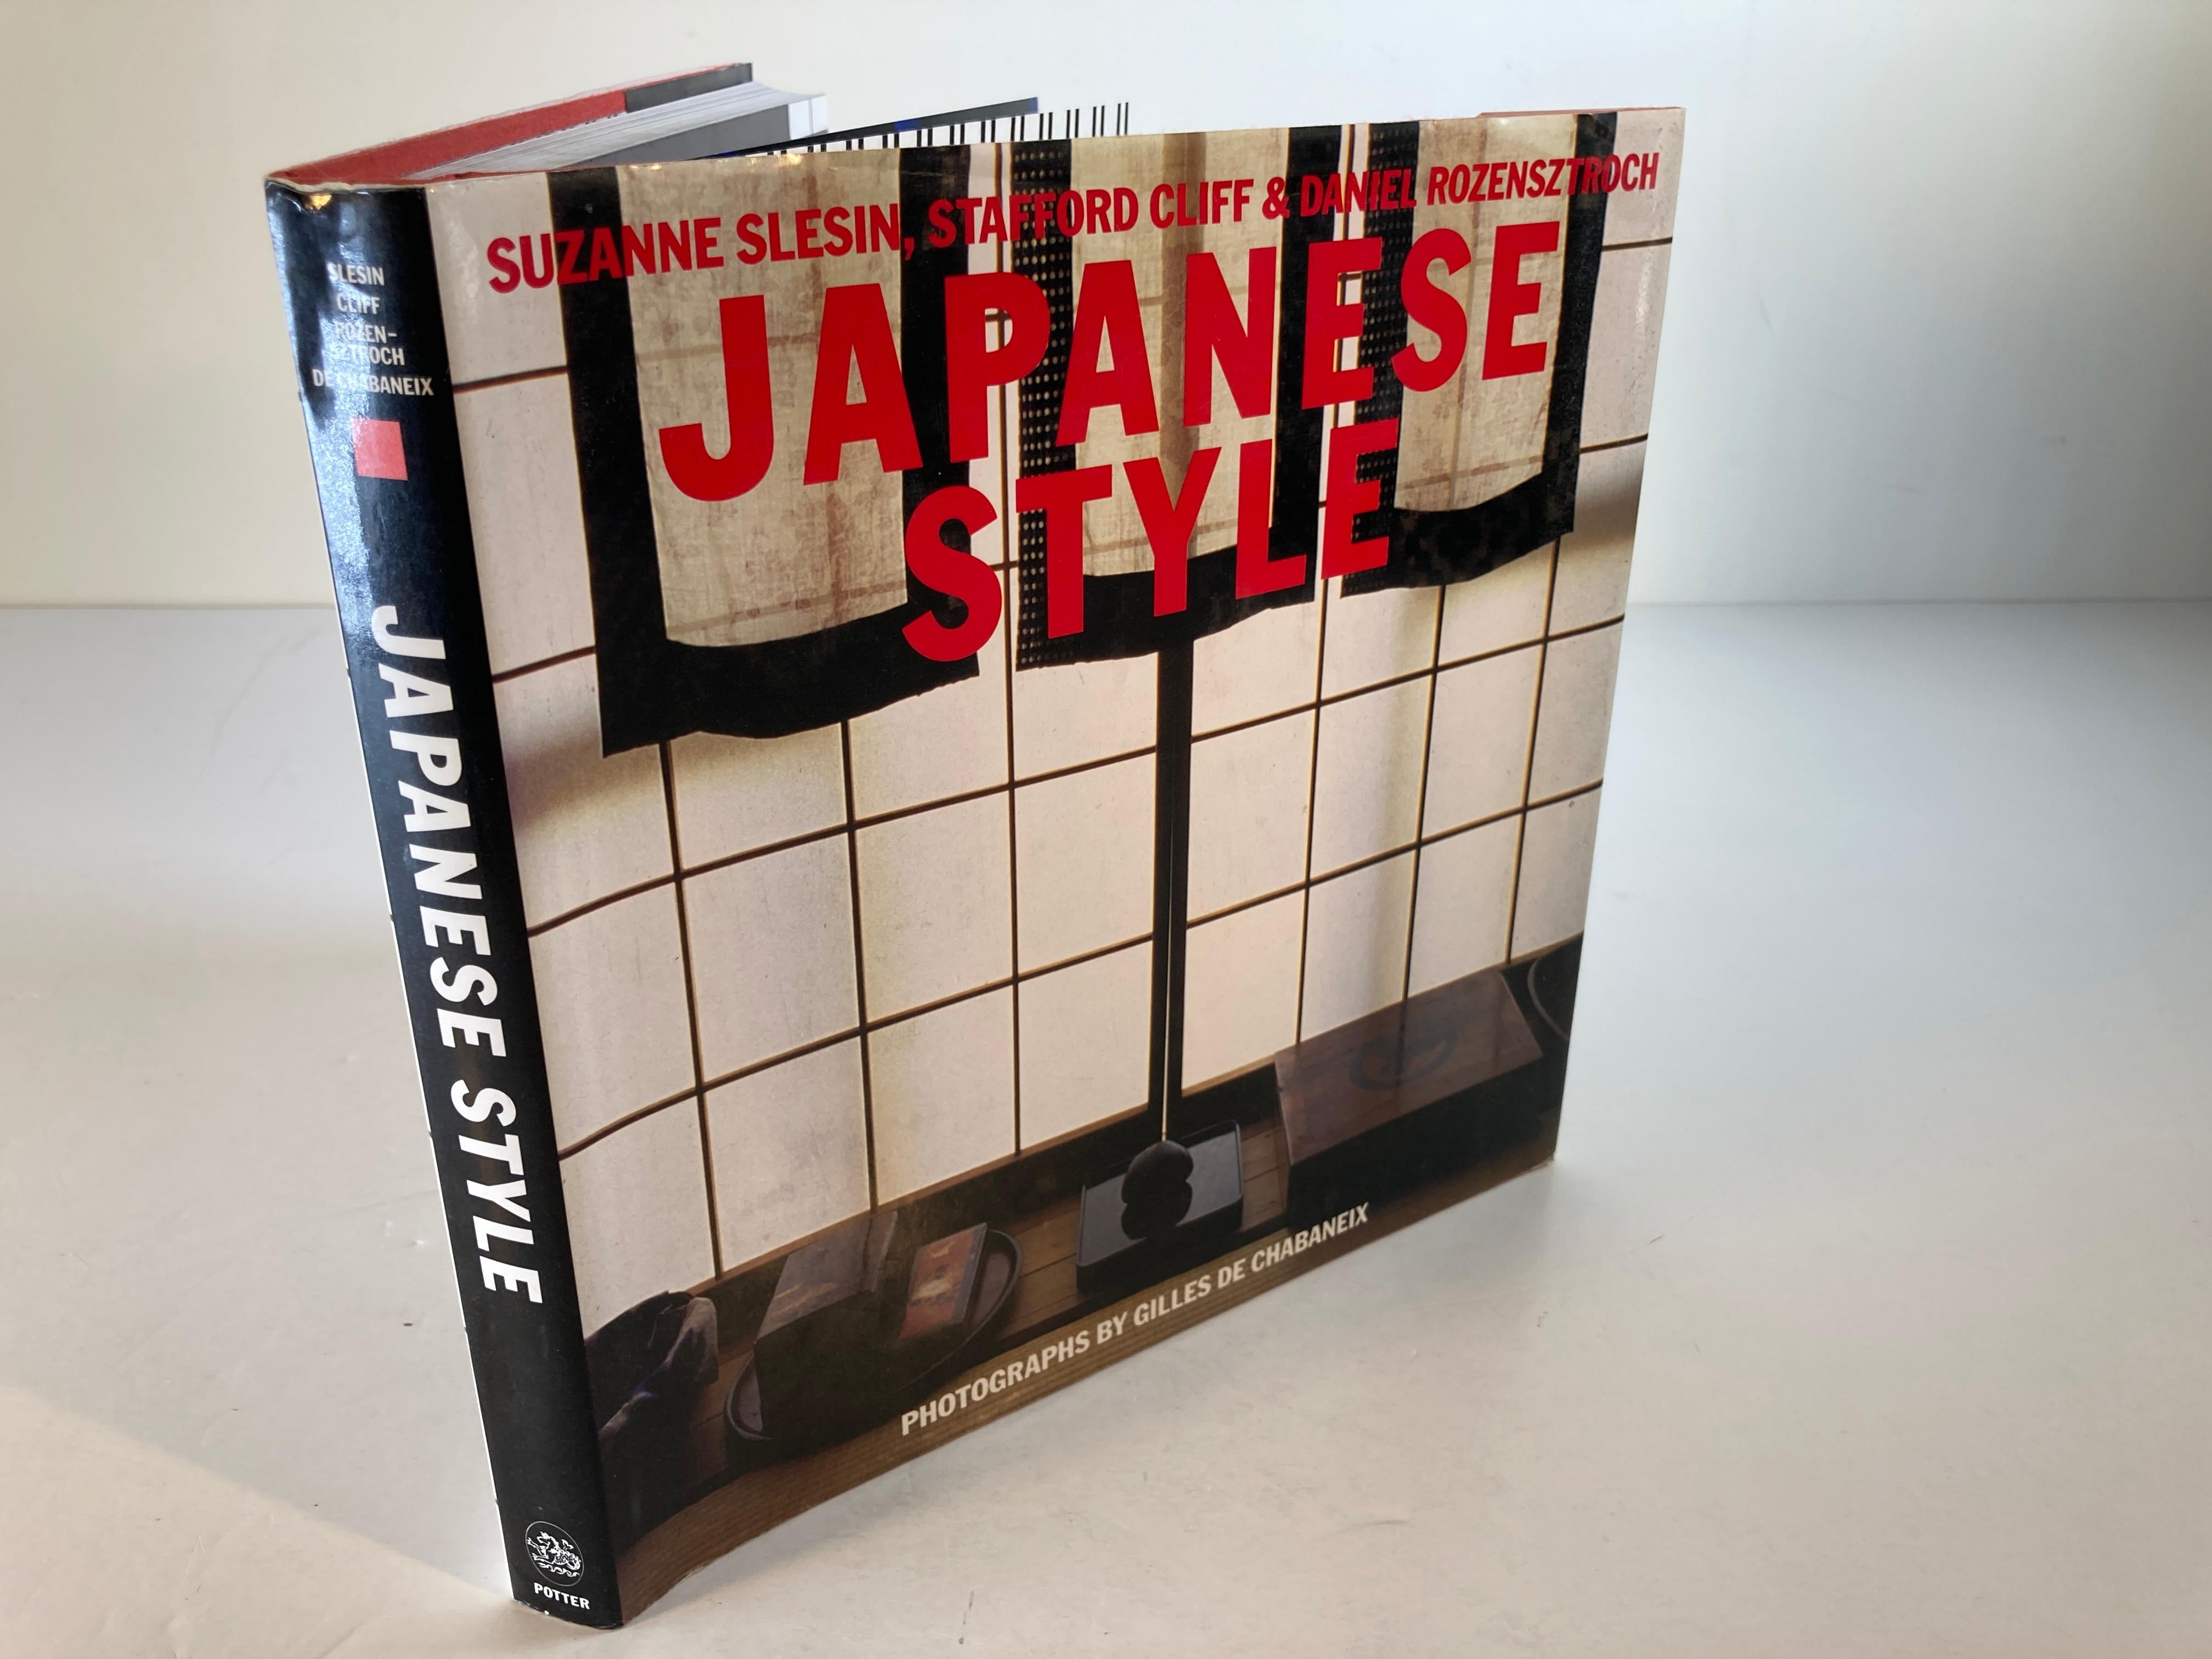 Japanese style
Suzanne Slesin, Stafford Cliff, Daniel Rozensztroch.
Slesin and Cliff (French Style and English Style) with their coauthor and photographer from Caribbean Style look at the richness, diversity, and never-ending romance of how the